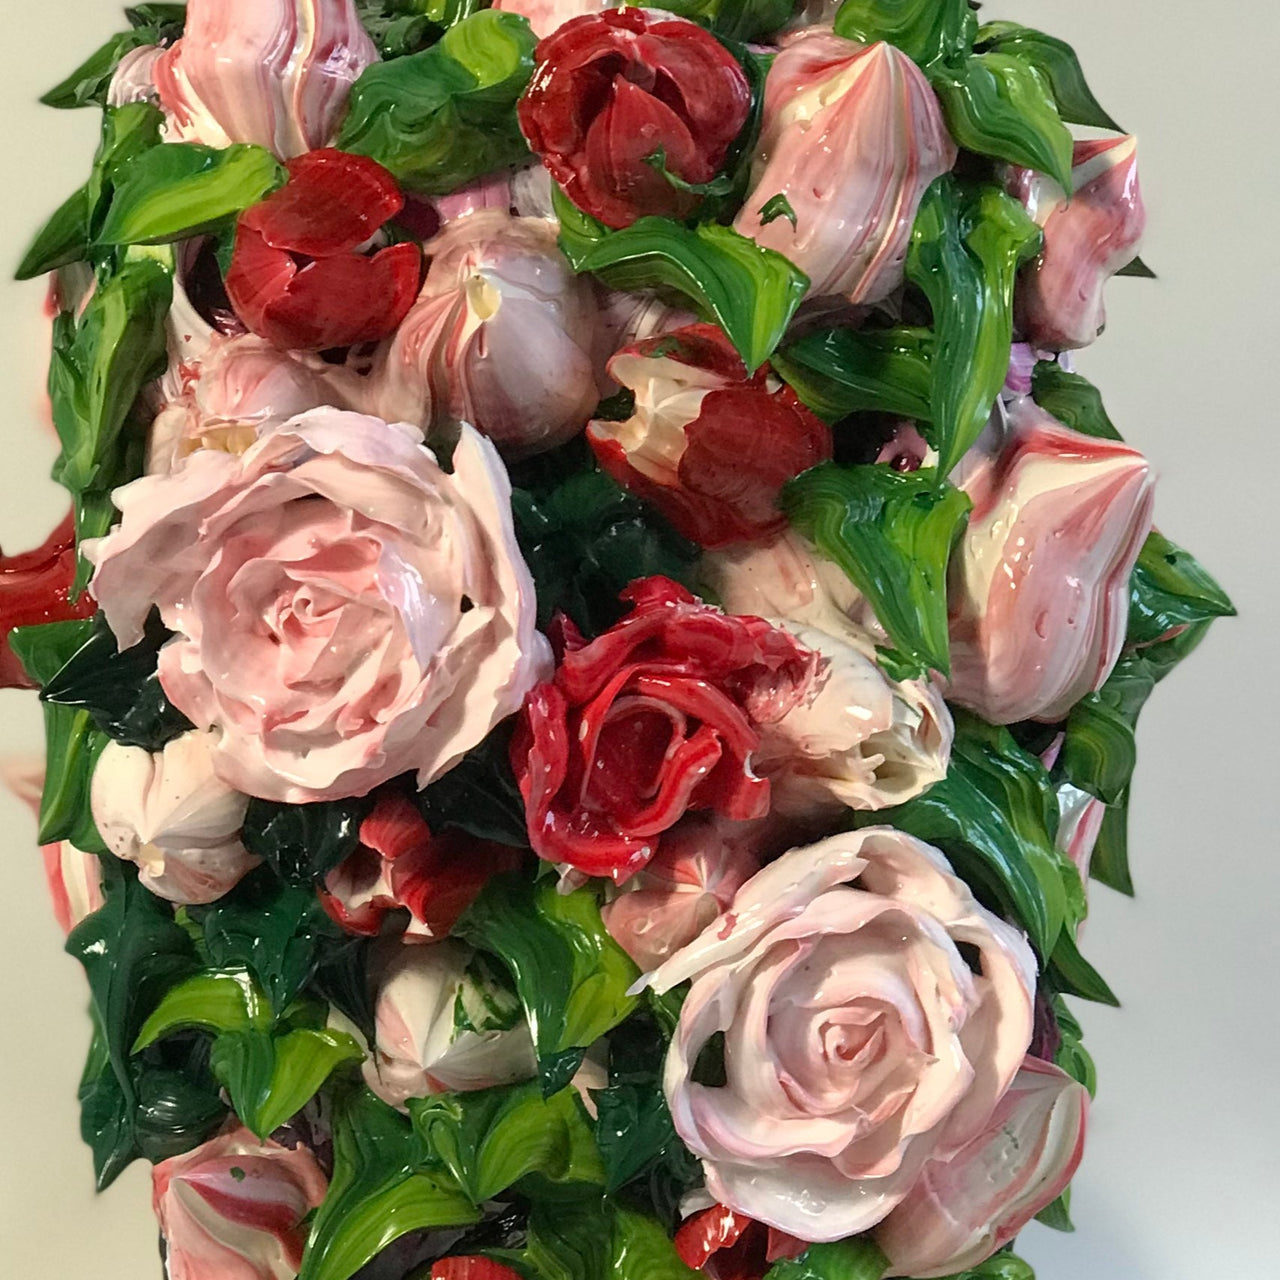 Spring Tulips & Roses -  Lusciousworks™ Bouquet Art